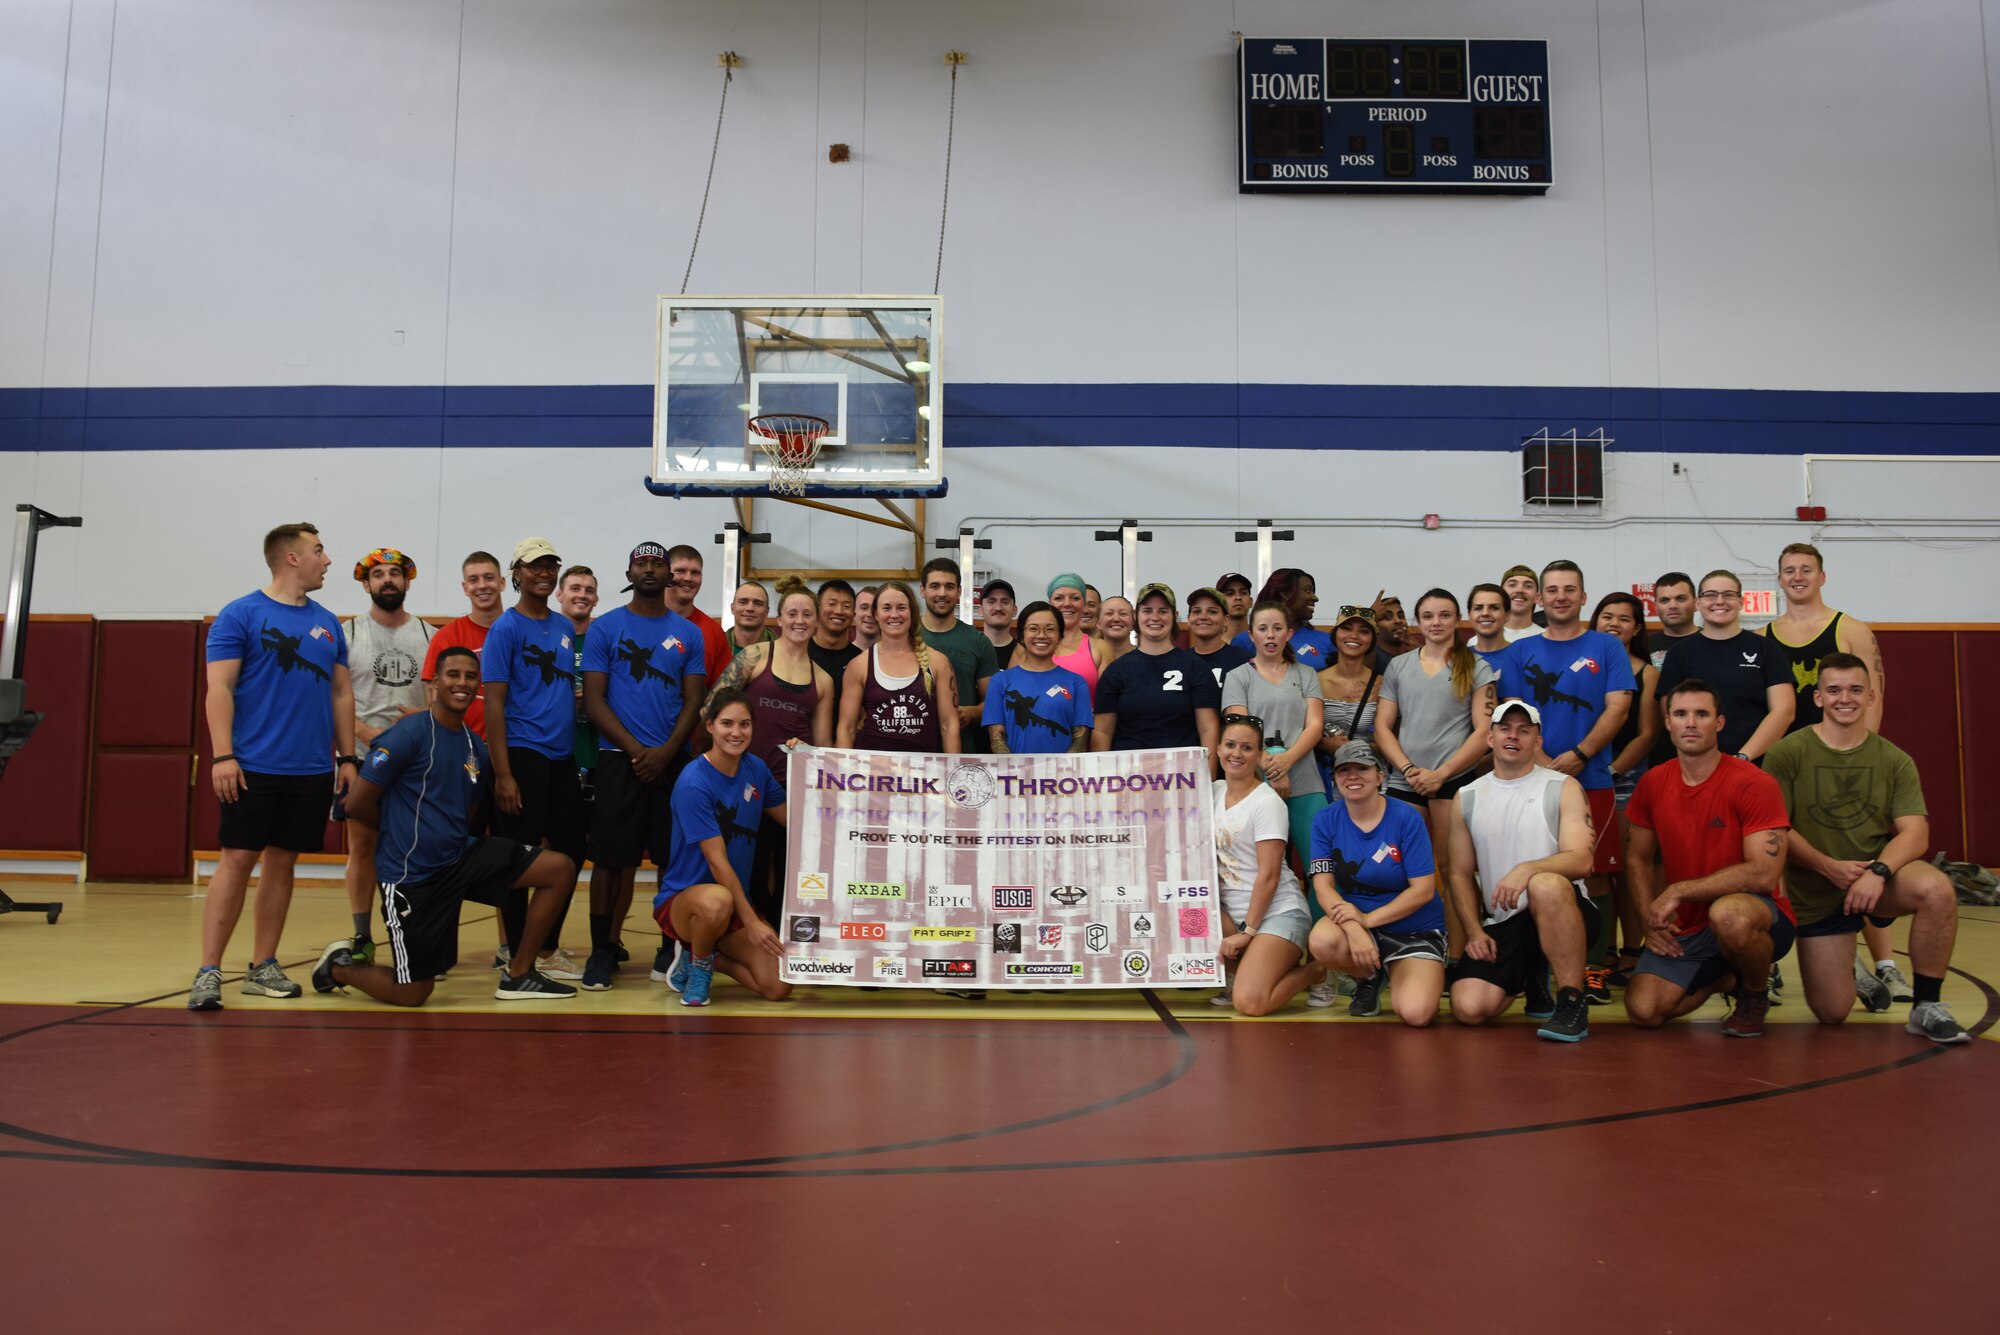 Competitors, spectators and volunteers pose for a photo after the Incirlik Throw Down CrossFit competition at Incirlik Air Base, Sept. 29, 2018.